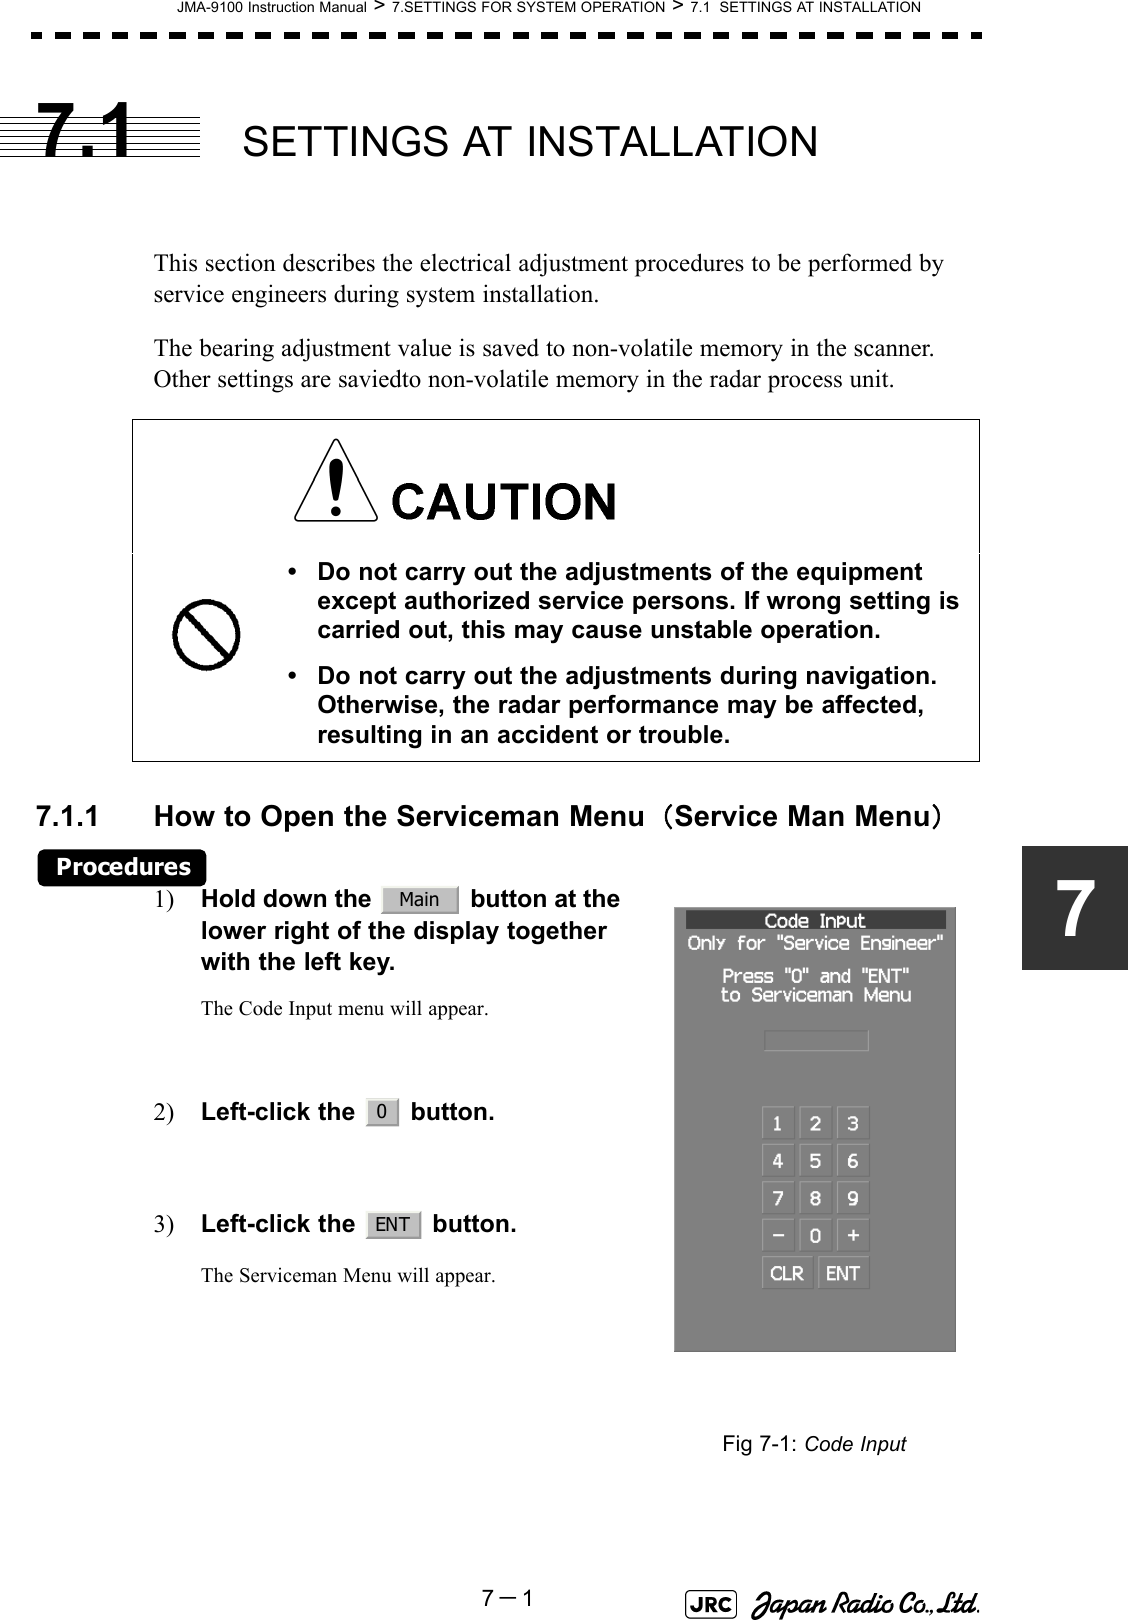 JMA-9100 Instruction Manual &gt; 7.SETTINGS FOR SYSTEM OPERATION &gt; 7.1  SETTINGS AT INSTALLATION7－177.1 SETTINGS AT INSTALLATIONThis section describes the electrical adjustment procedures to be performed by service engineers during system installation.The bearing adjustment value is saved to non-volatile memory in the scanner. Other settings are saviedto non-volatile memory in the radar process unit.7.1.1 How to Open the Serviceman Menu（Service Man Menu）Procedures1) Hold down the   button at the lower right of the display together with the left key.The Code Input menu will appear.2) Left-click the   button. 3) Left-click the   button.The Serviceman Menu will appear.• Do not carry out the adjustments of the equipment except authorized service persons. If wrong setting is carried out, this may cause unstable operation.• Do not carry out the adjustments during navigation. Otherwise, the radar performance may be affected, resulting in an accident or trouble.Fig 7-1: Code InputMain0ENT